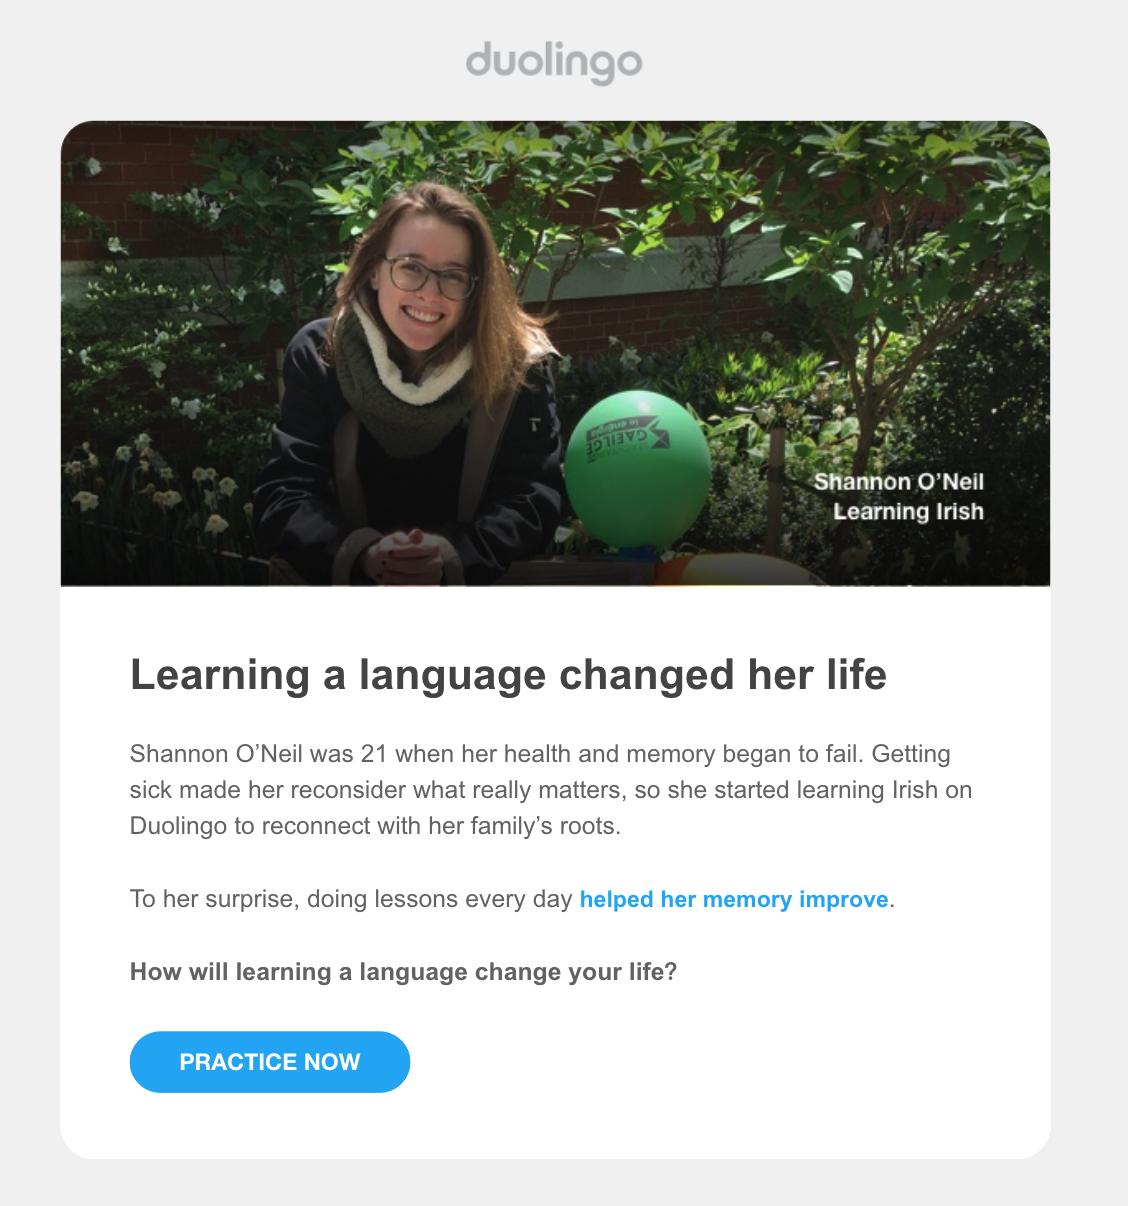 Email from Duolingo with a customer story